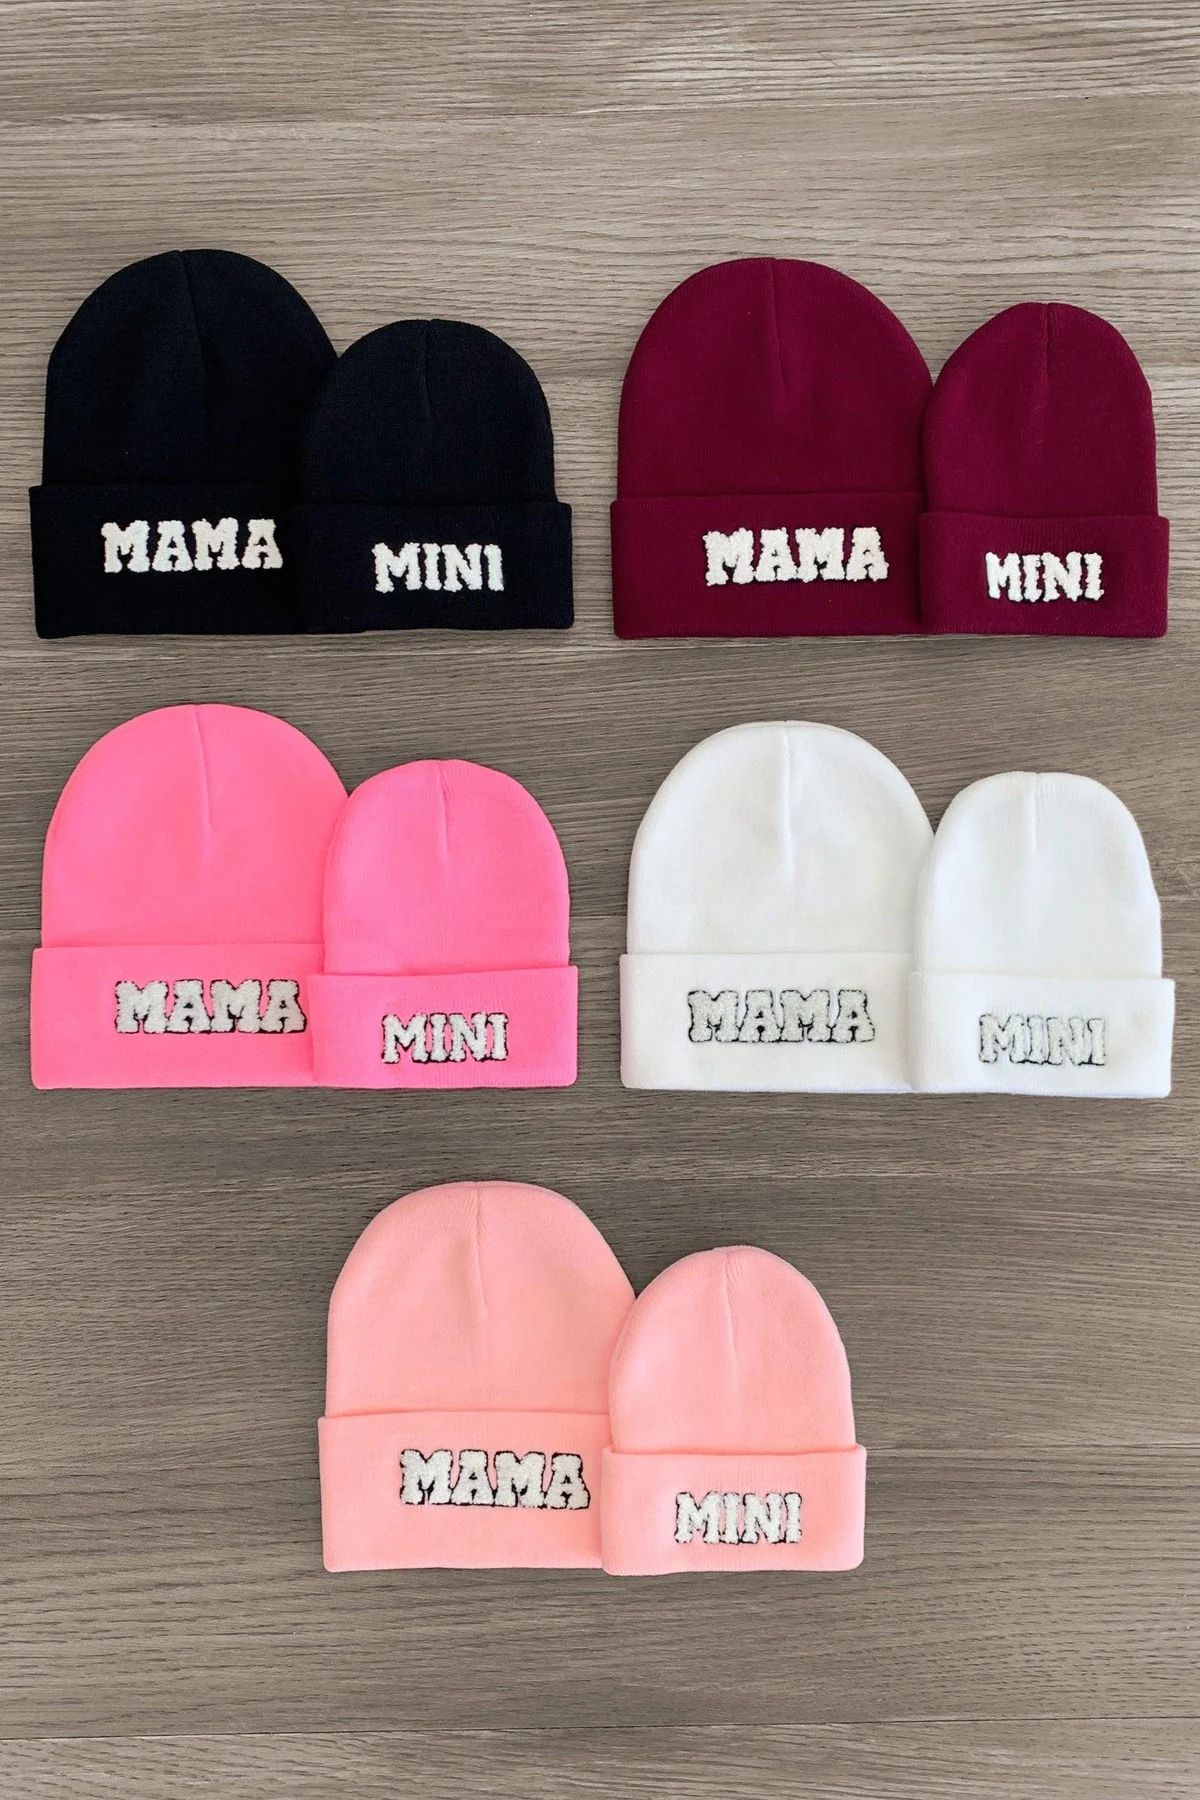 Mom & Me - "Mama & Mini" Beanies | Sparkle In Pink